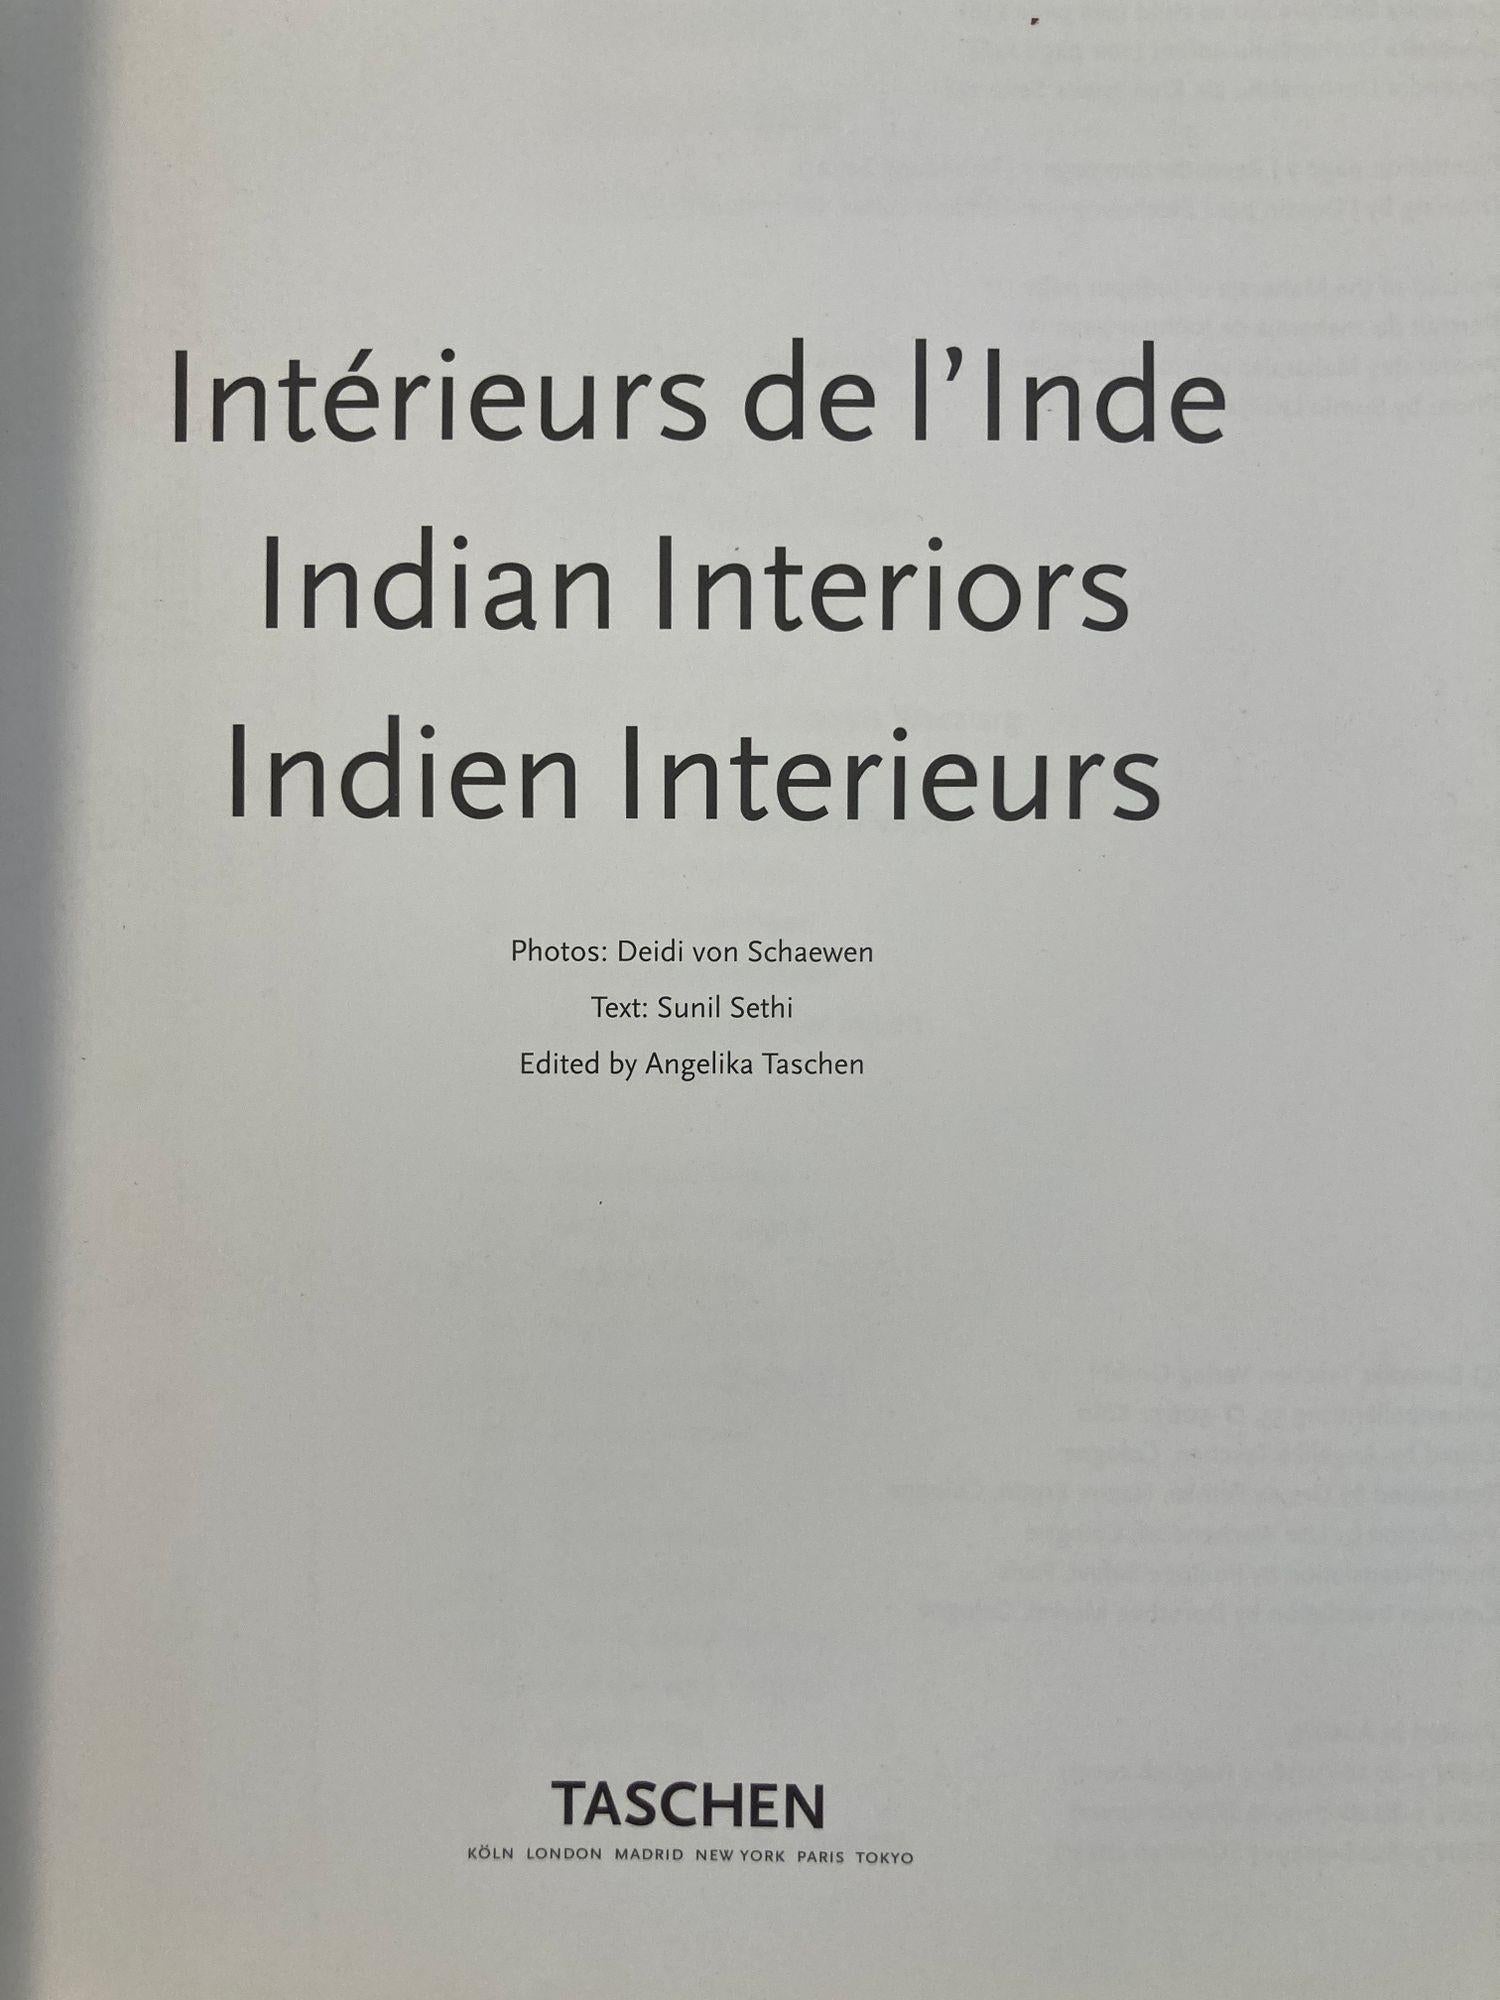 Indian Interiors Hardcover Book Taschen 1999 by Sunil Sethi For Sale 8